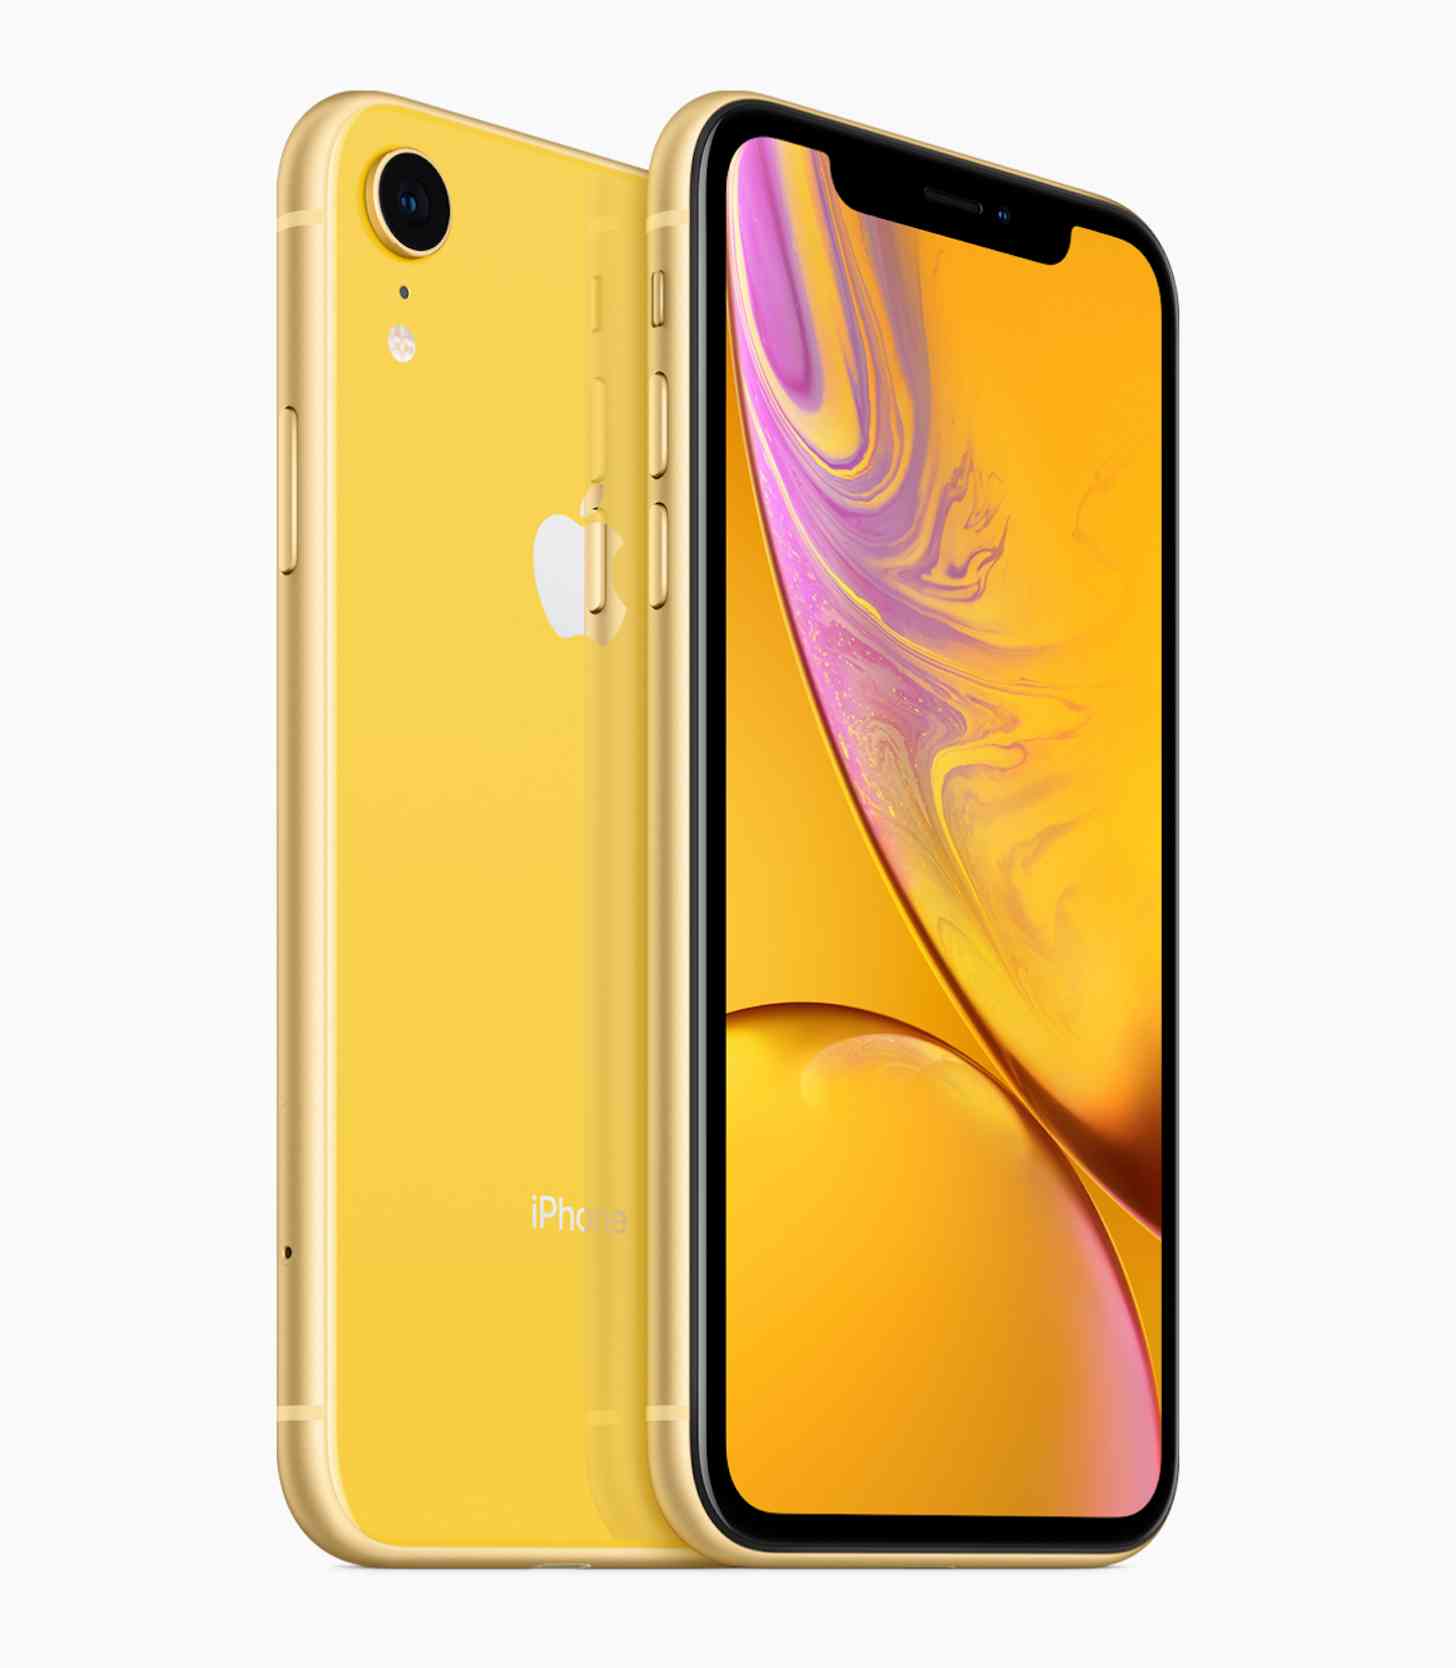 Apple iPhone Xr in yellow